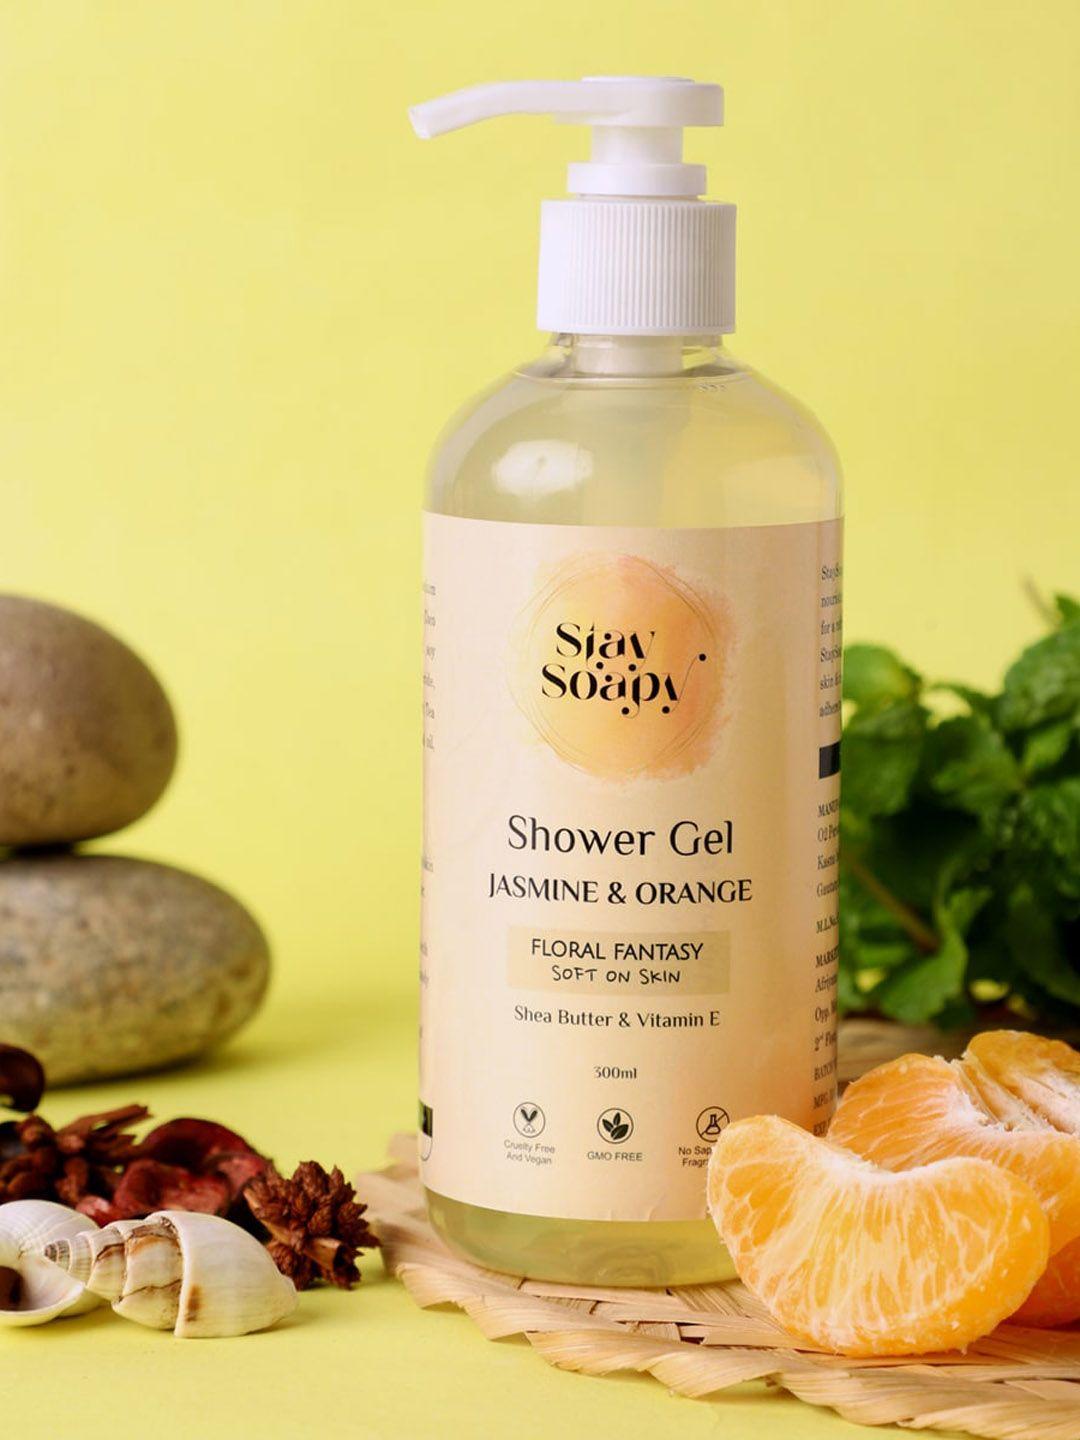 stay soapy floral fantasy jasmine & orange shower gel with shea butter & vitamin e- 300 ml